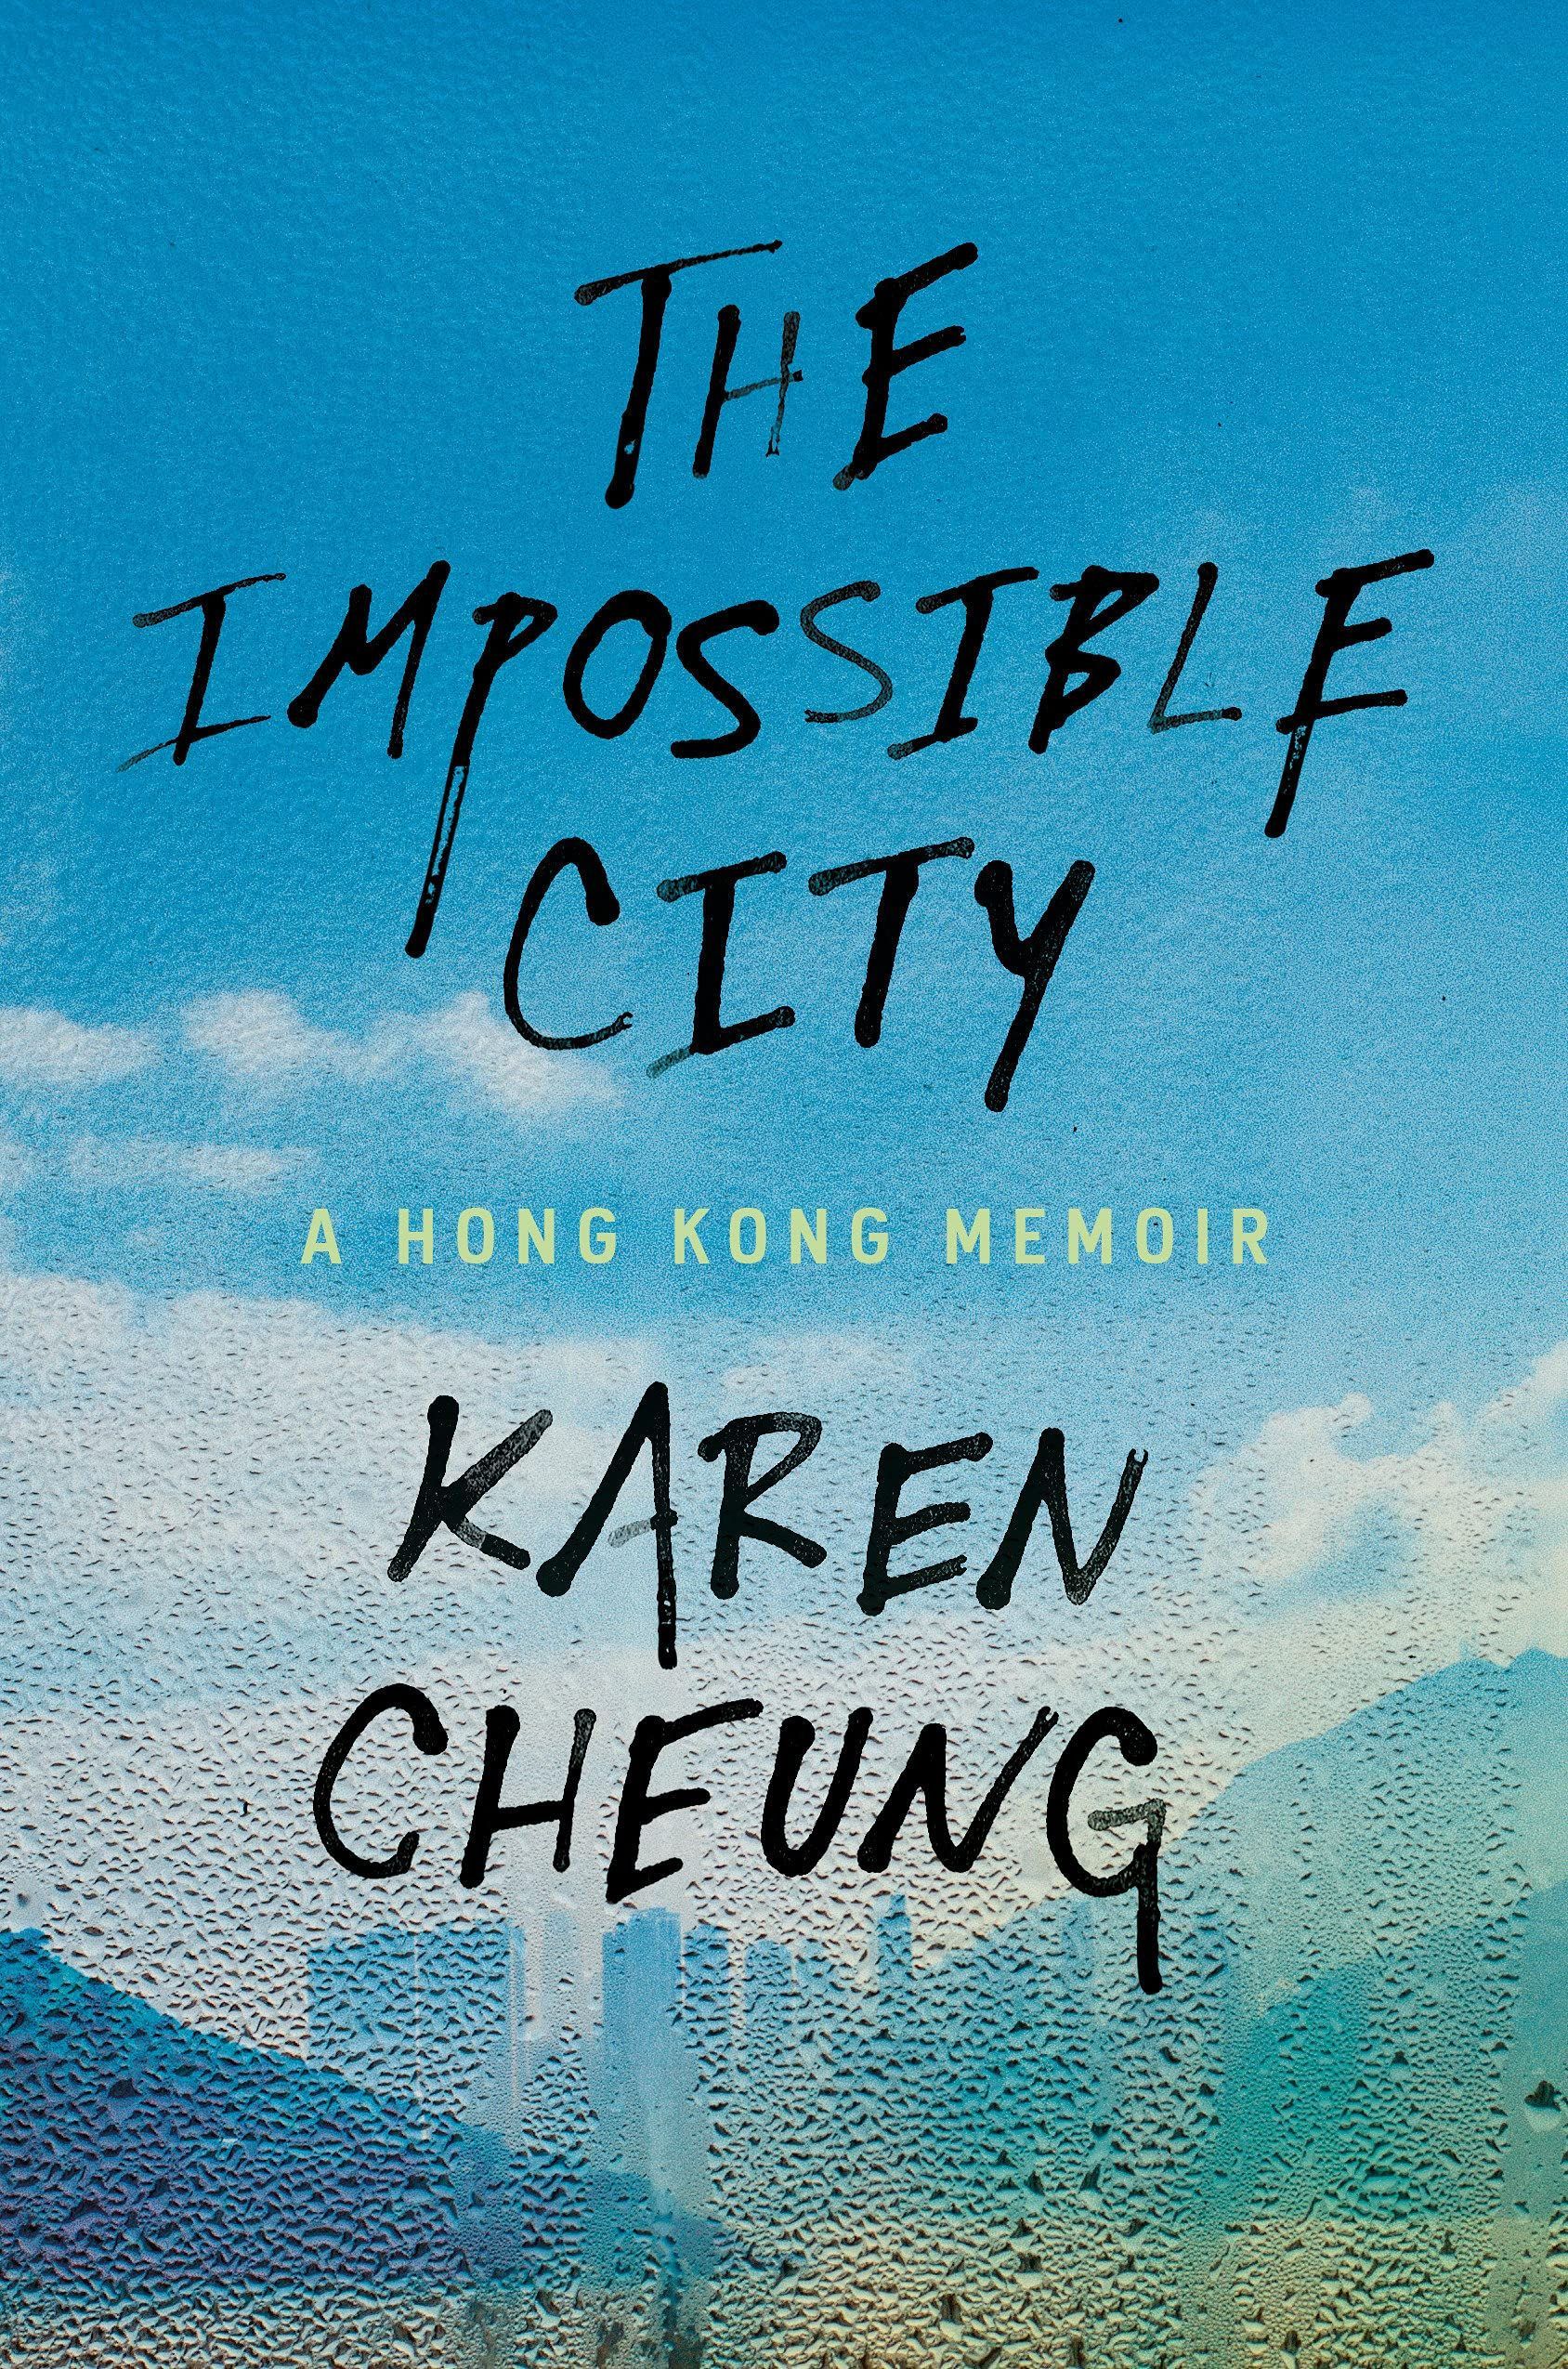 A Third Space: On Karen Cheung’s “The Impossible City”